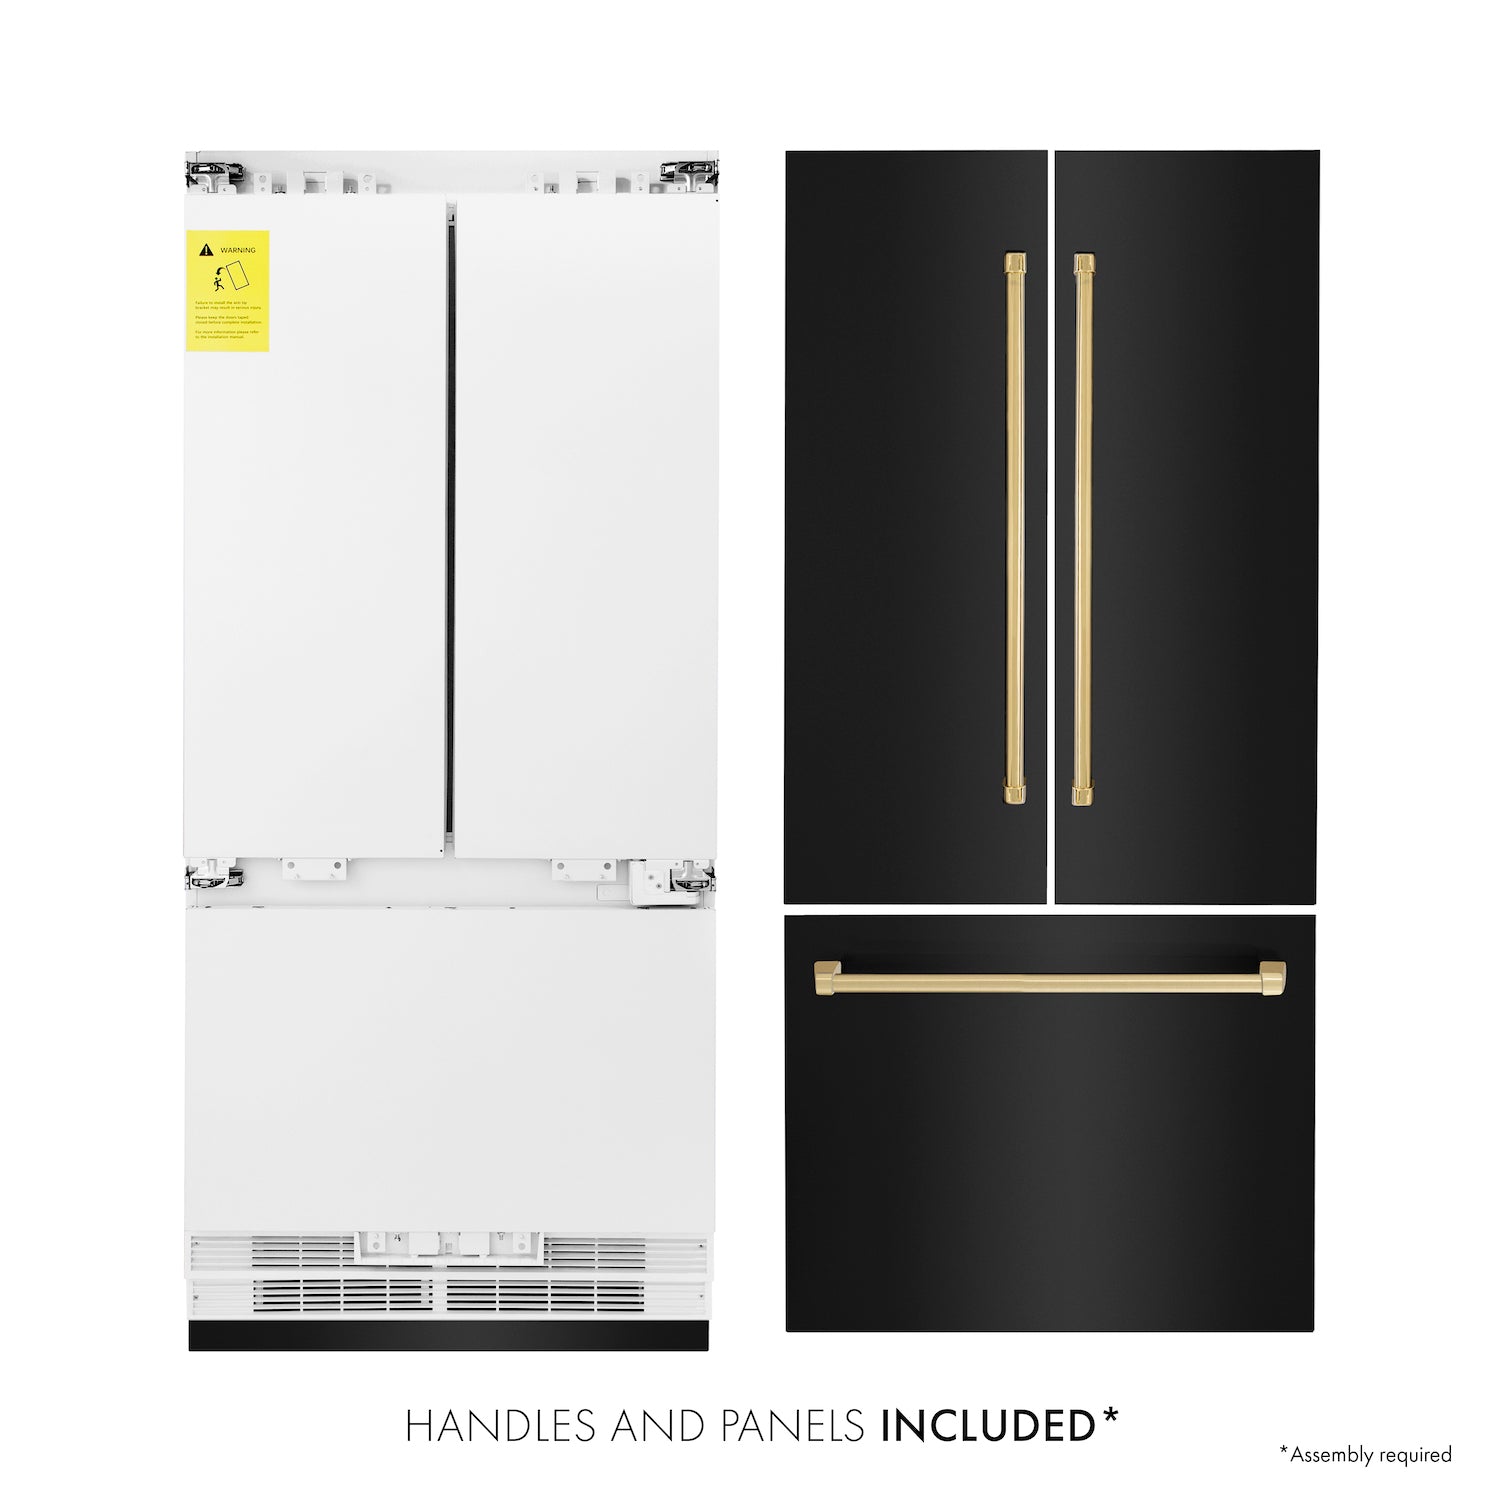 ZLINE Autograph Edition 36 in. 19.6 cu. ft. Built-in 2-Door Bottom Freezer Refrigerator with Internal Water and Ice Dispenser in Black Stainless Steel with Polished Gold Accents (RBIVZ-BS-36-G) front, refrigeration unit, panels, and handles separated .